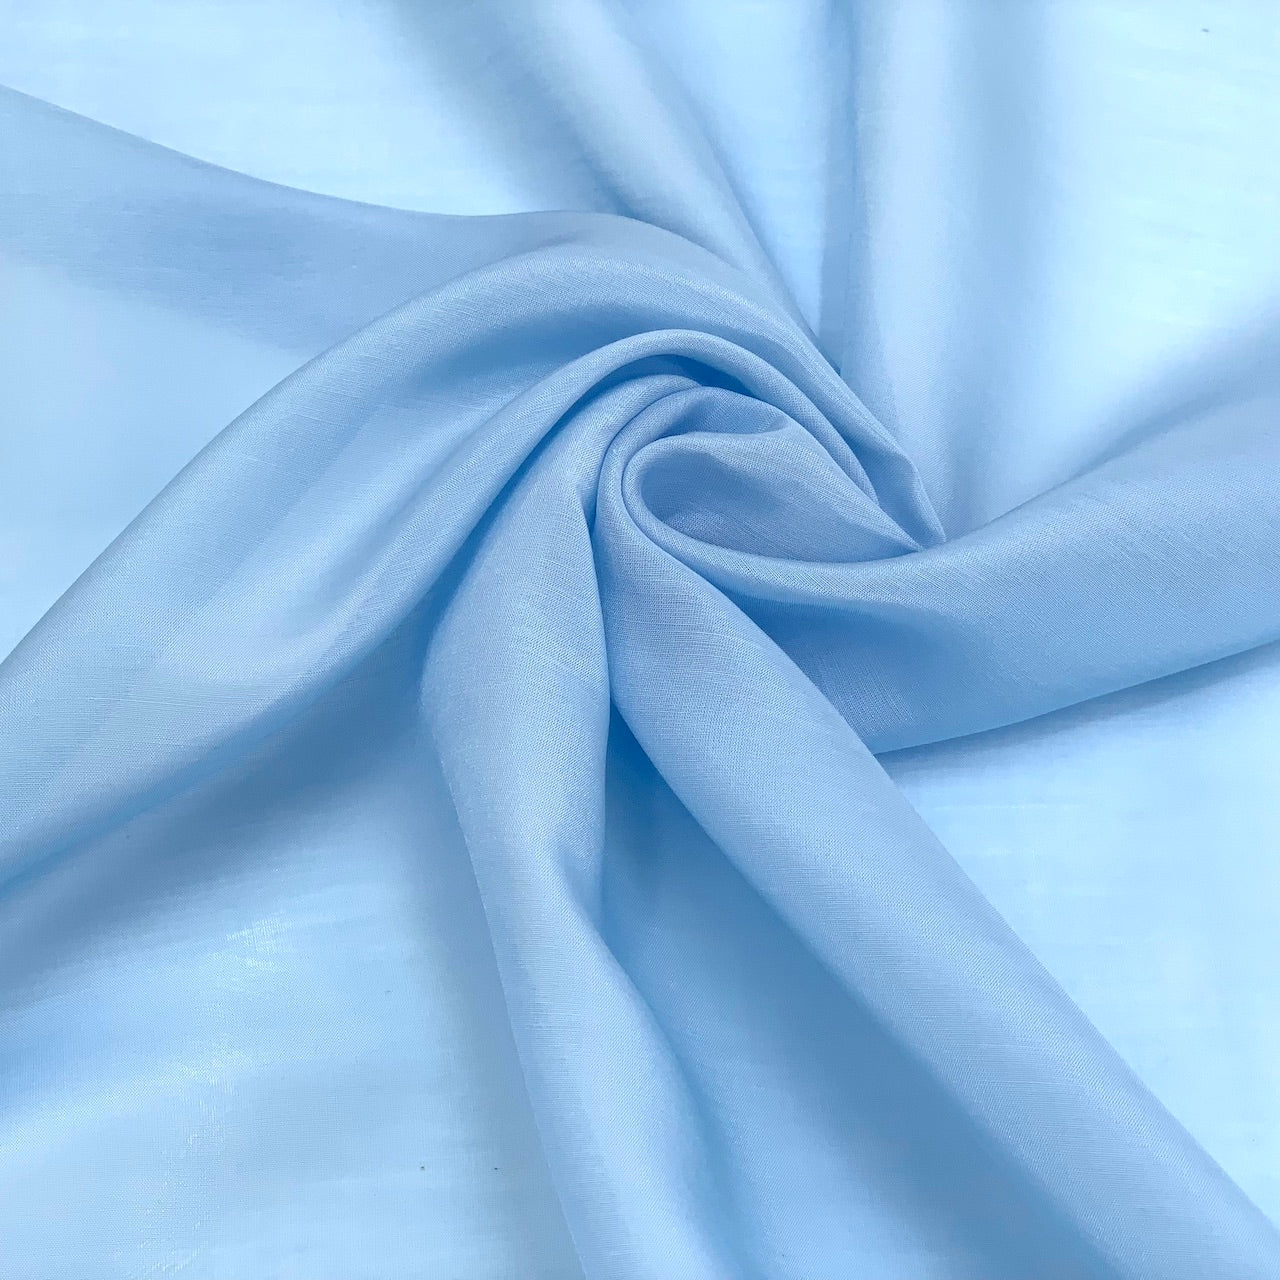 silk cotton fabric pale blue voile fabric collection